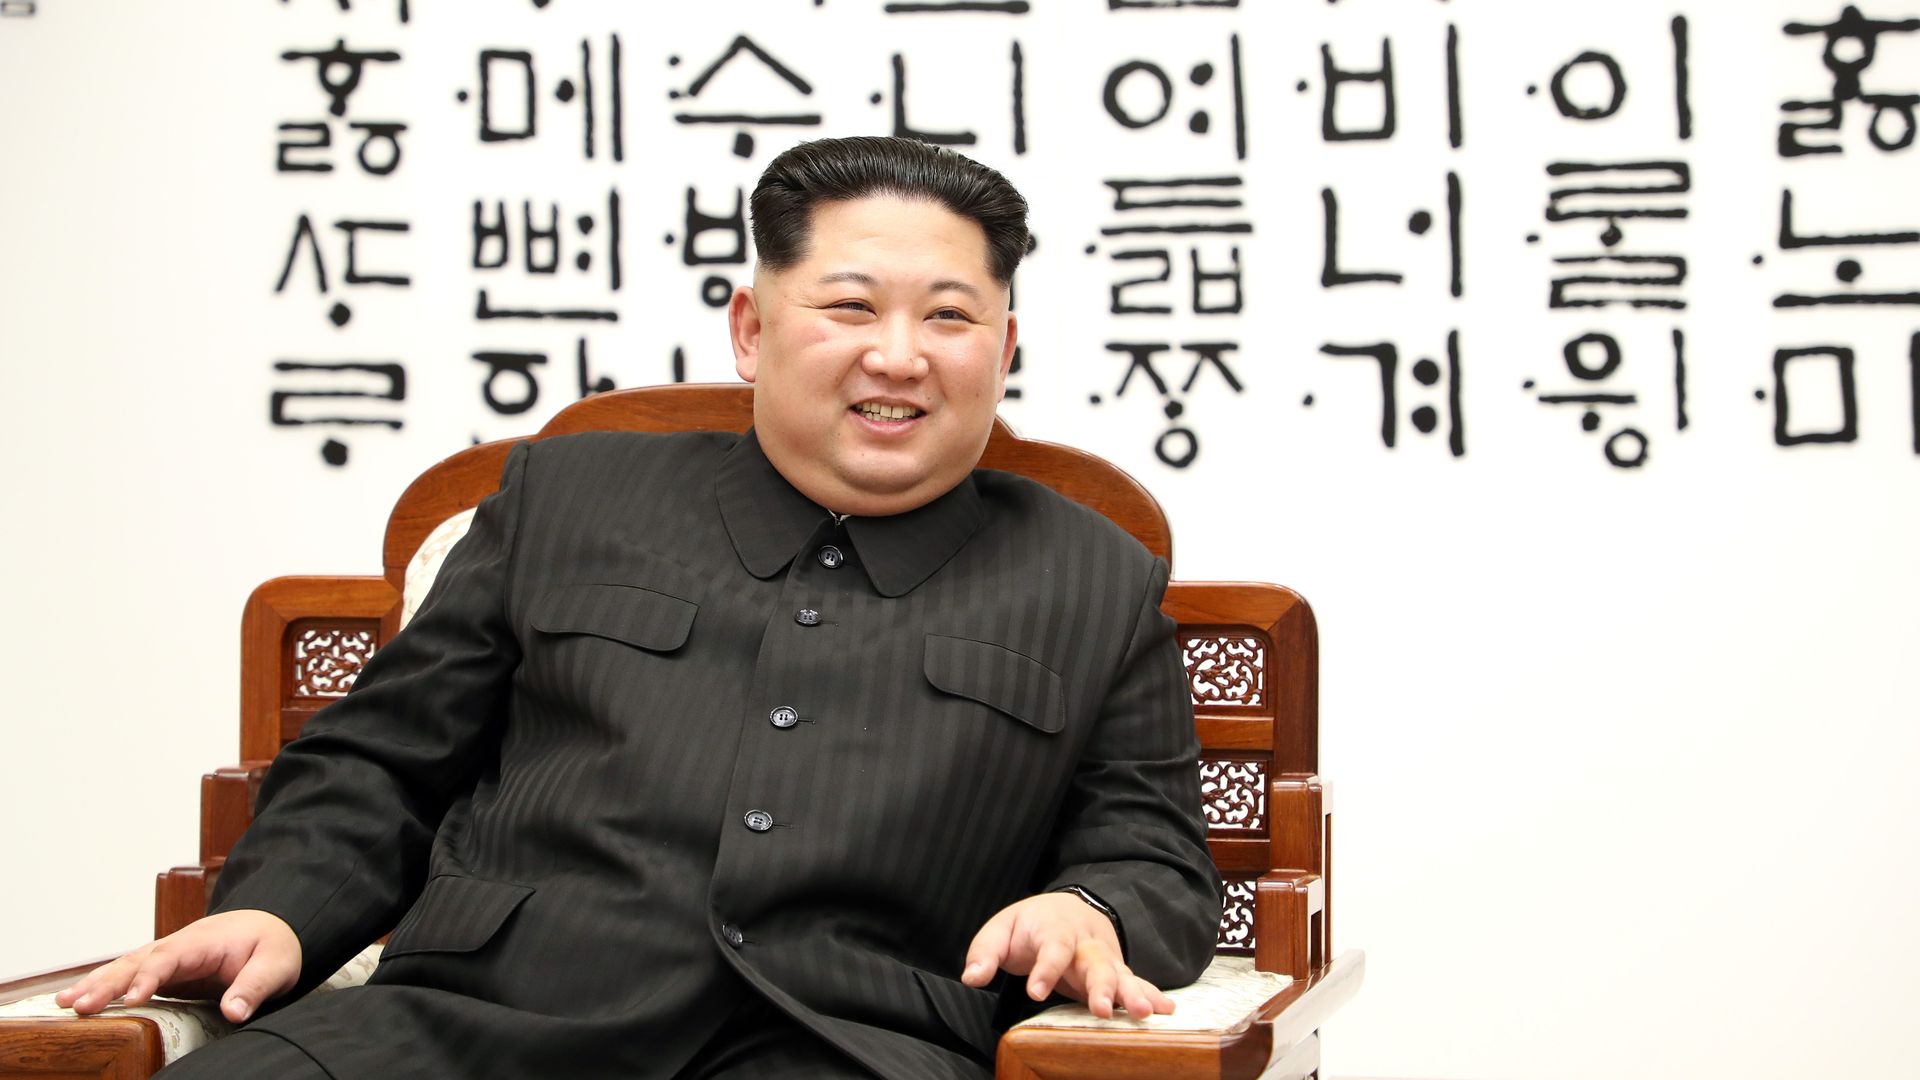 Kim Jong-un sits in chair smiling.